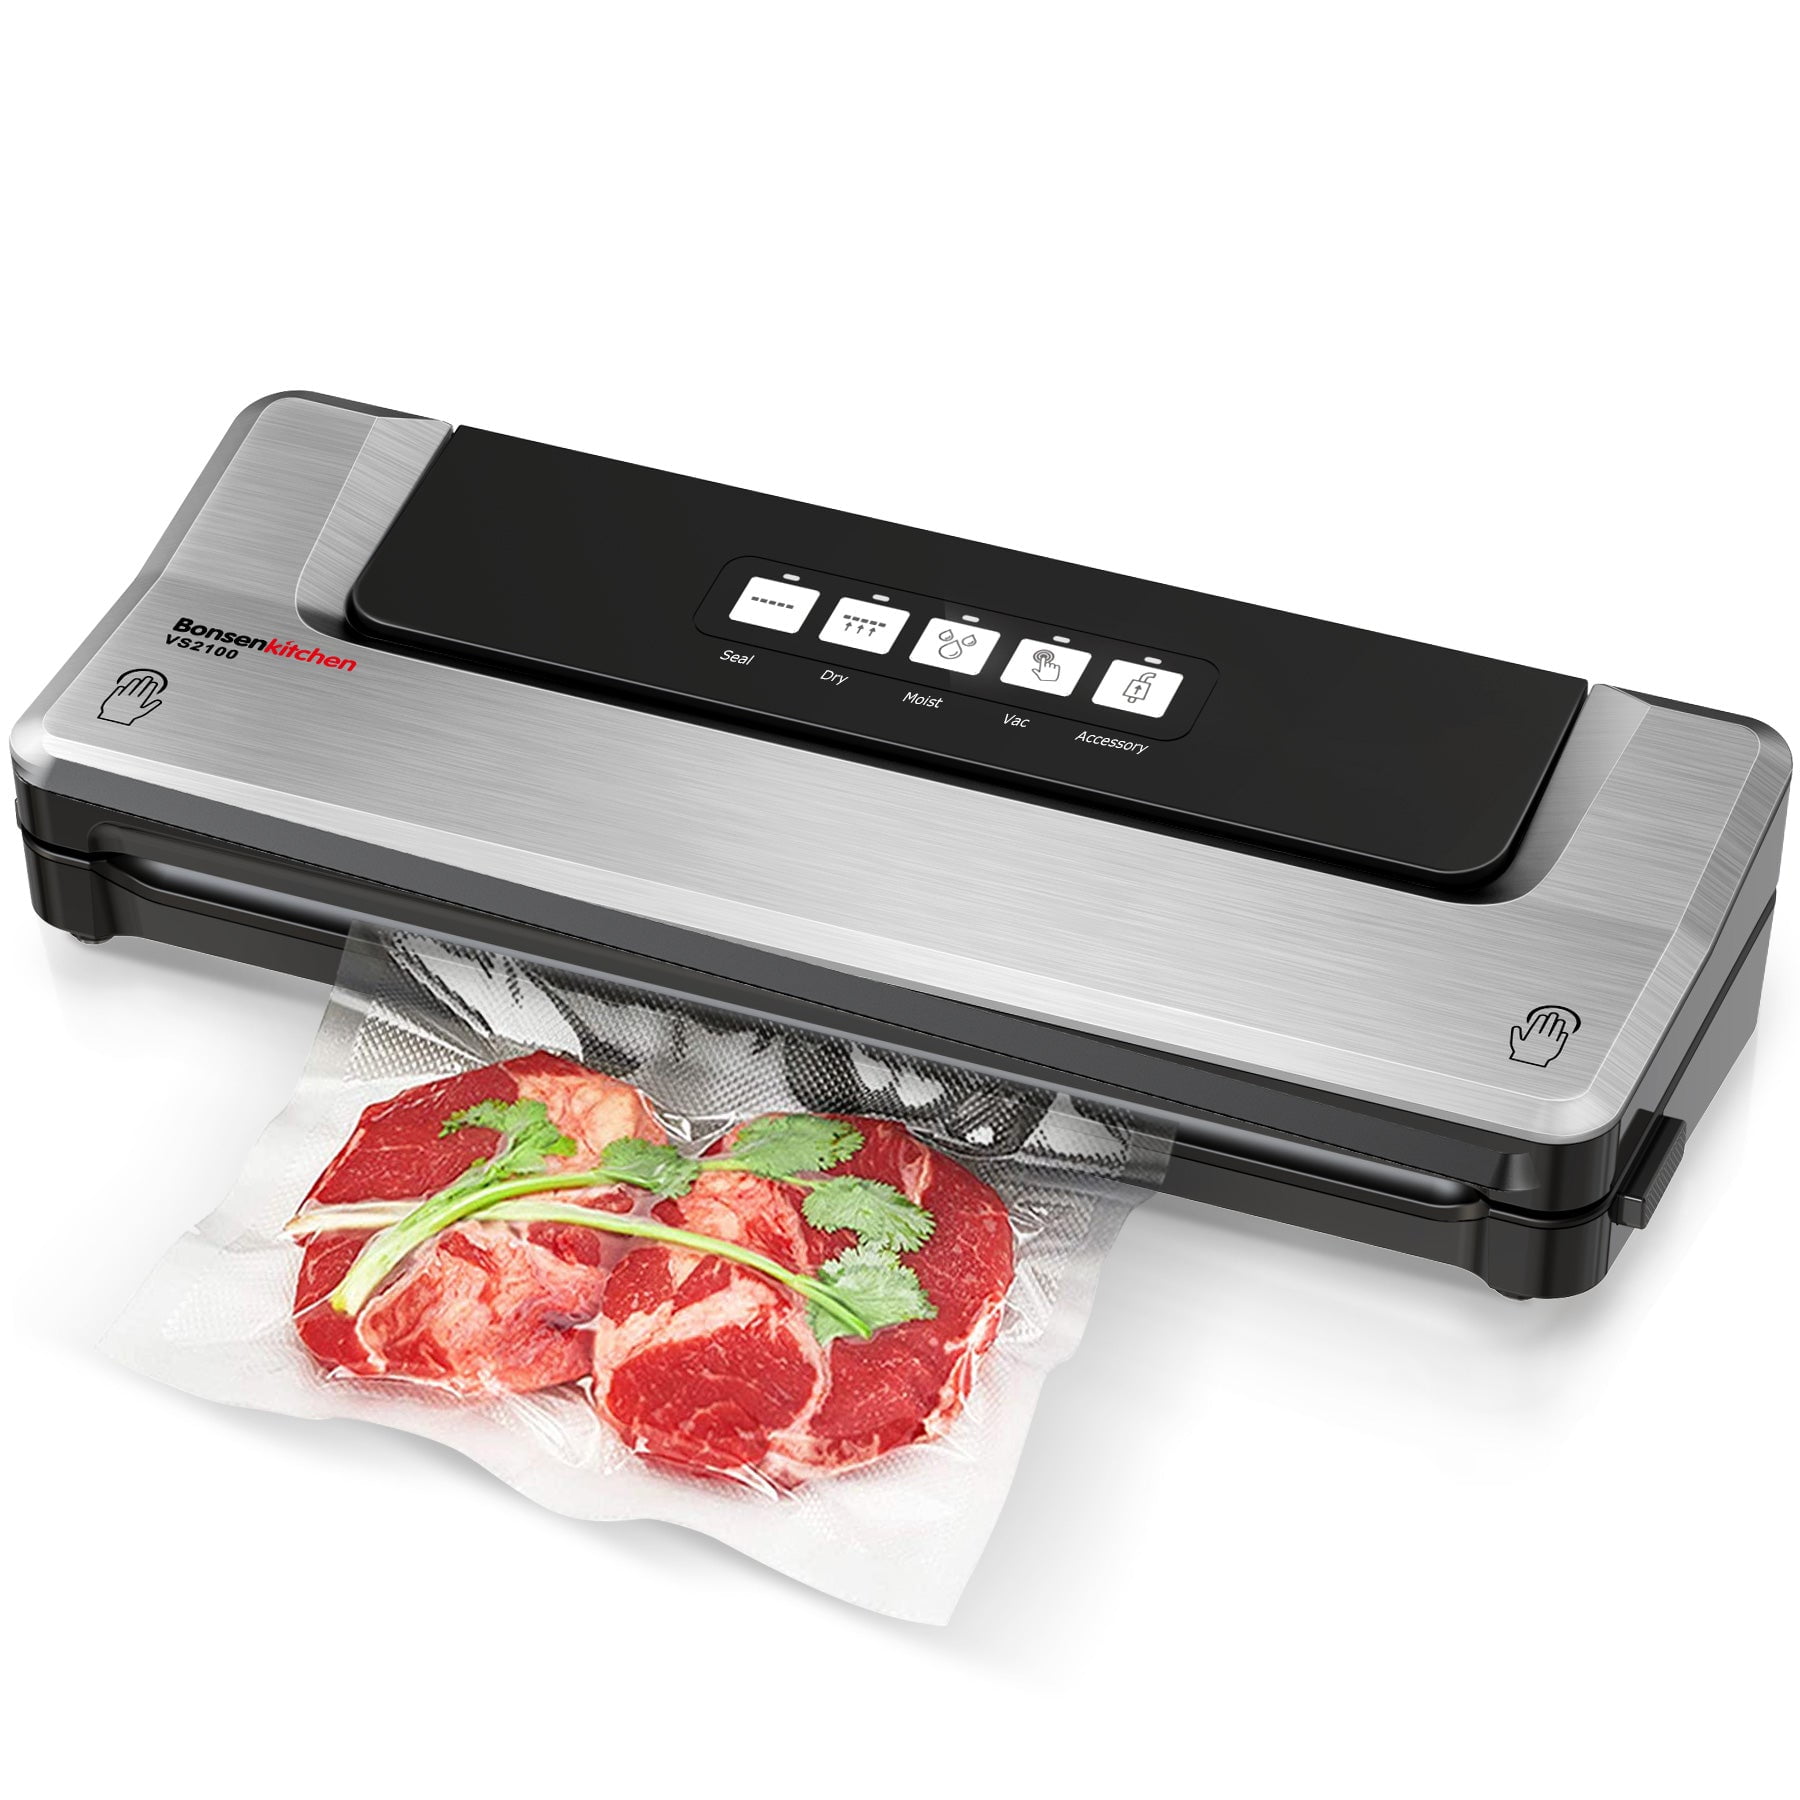 Bonsenkitchen Compact Automatic 5-in-1 Vacuum Sealer Machine for Food